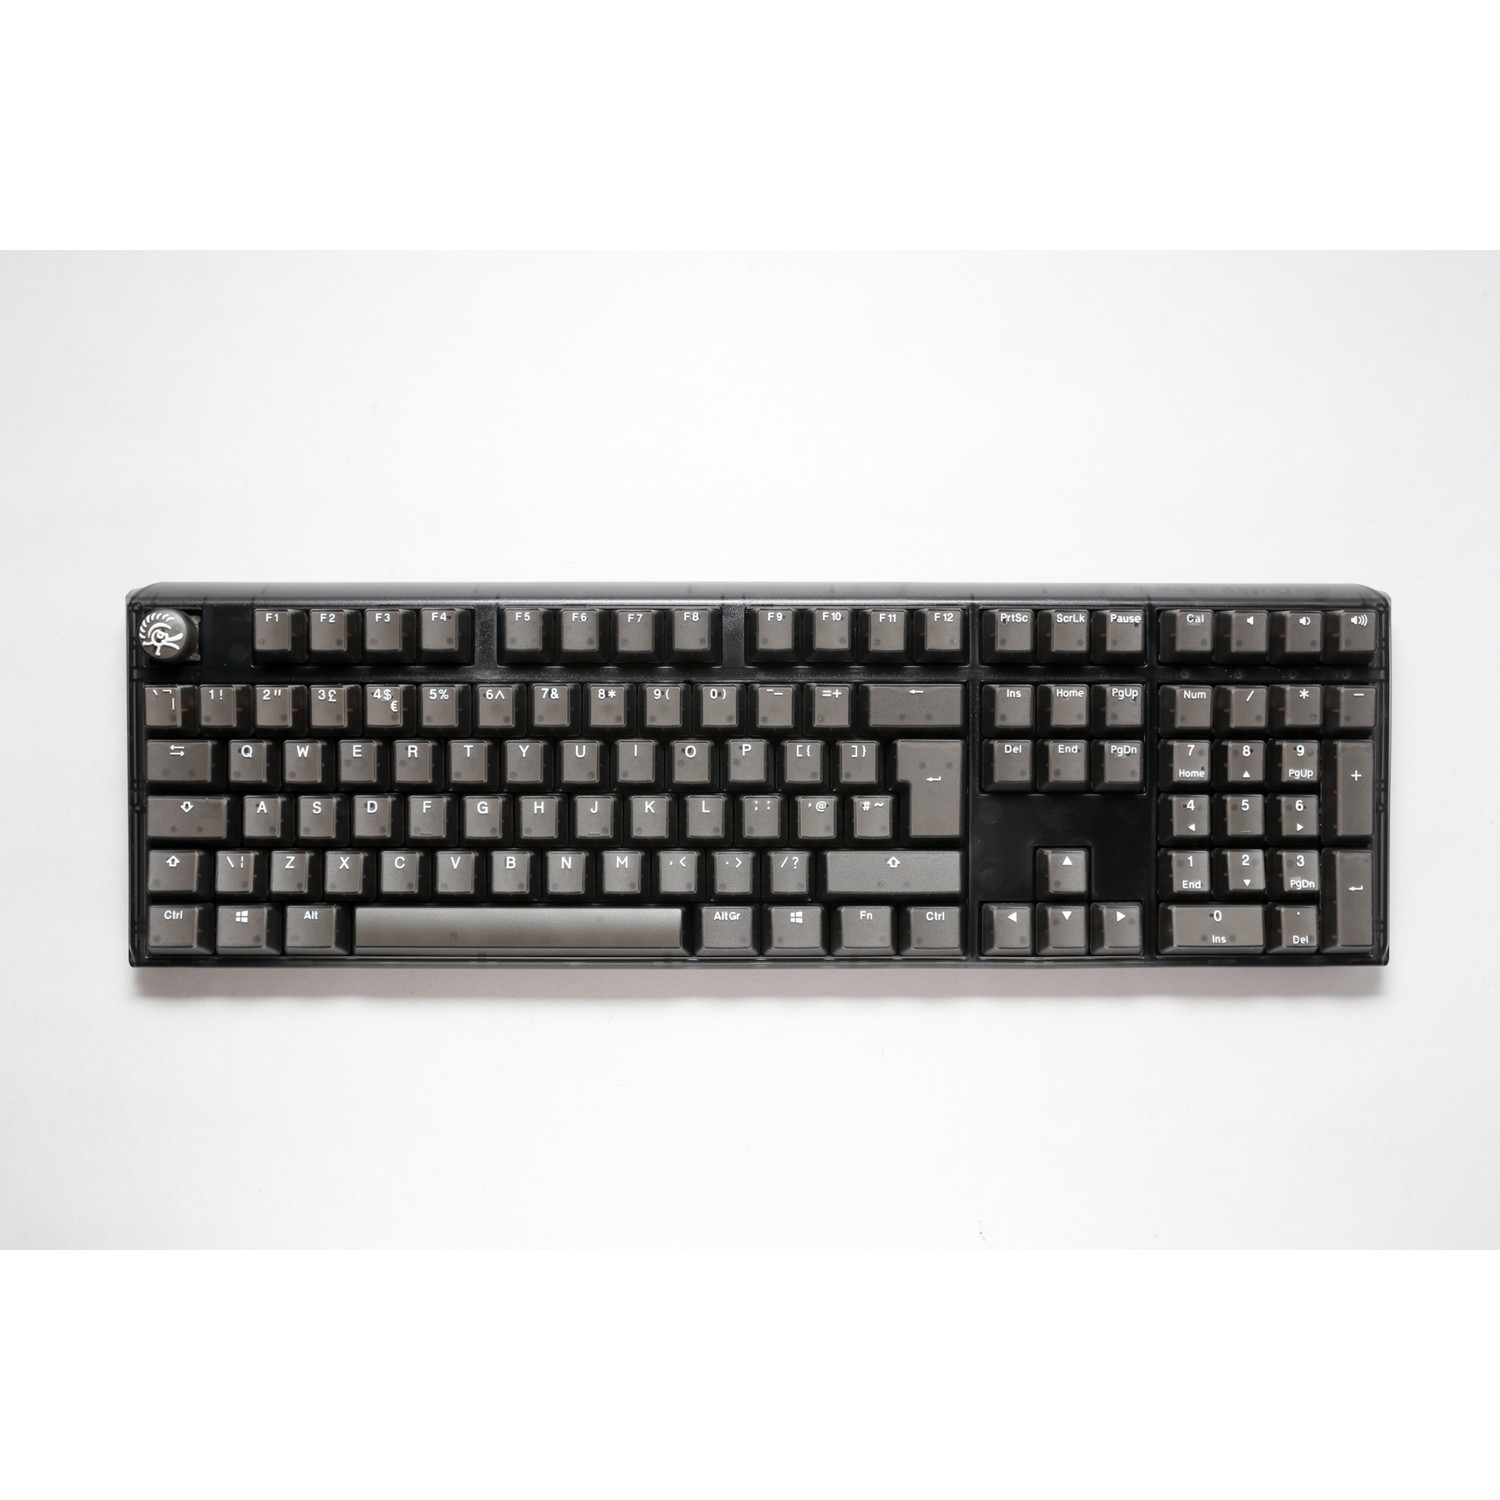 Ducky - Ducky One 3 Aura Mechanical Gaming Keyboard Black Cherry Red Switch UK Layout